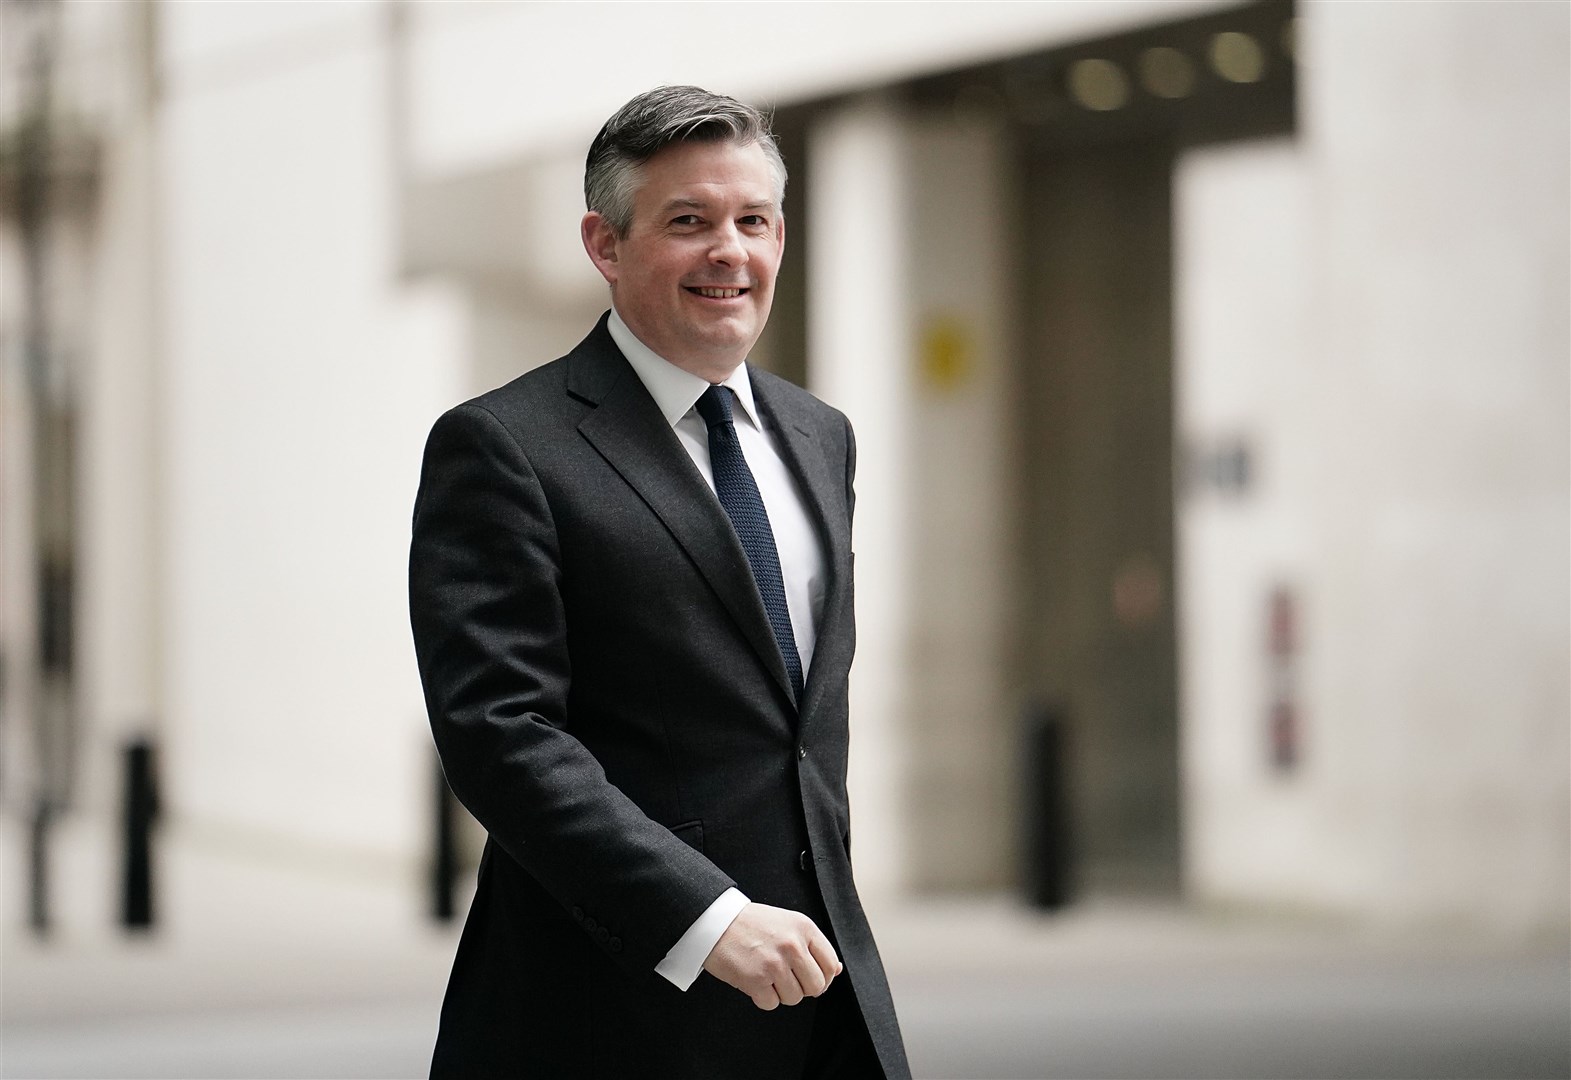 Jonathan Ashworth, Shadow Cabinet Office minister, said the prime minister had questions to answer over the photograph (Jordan Pettit/PA)